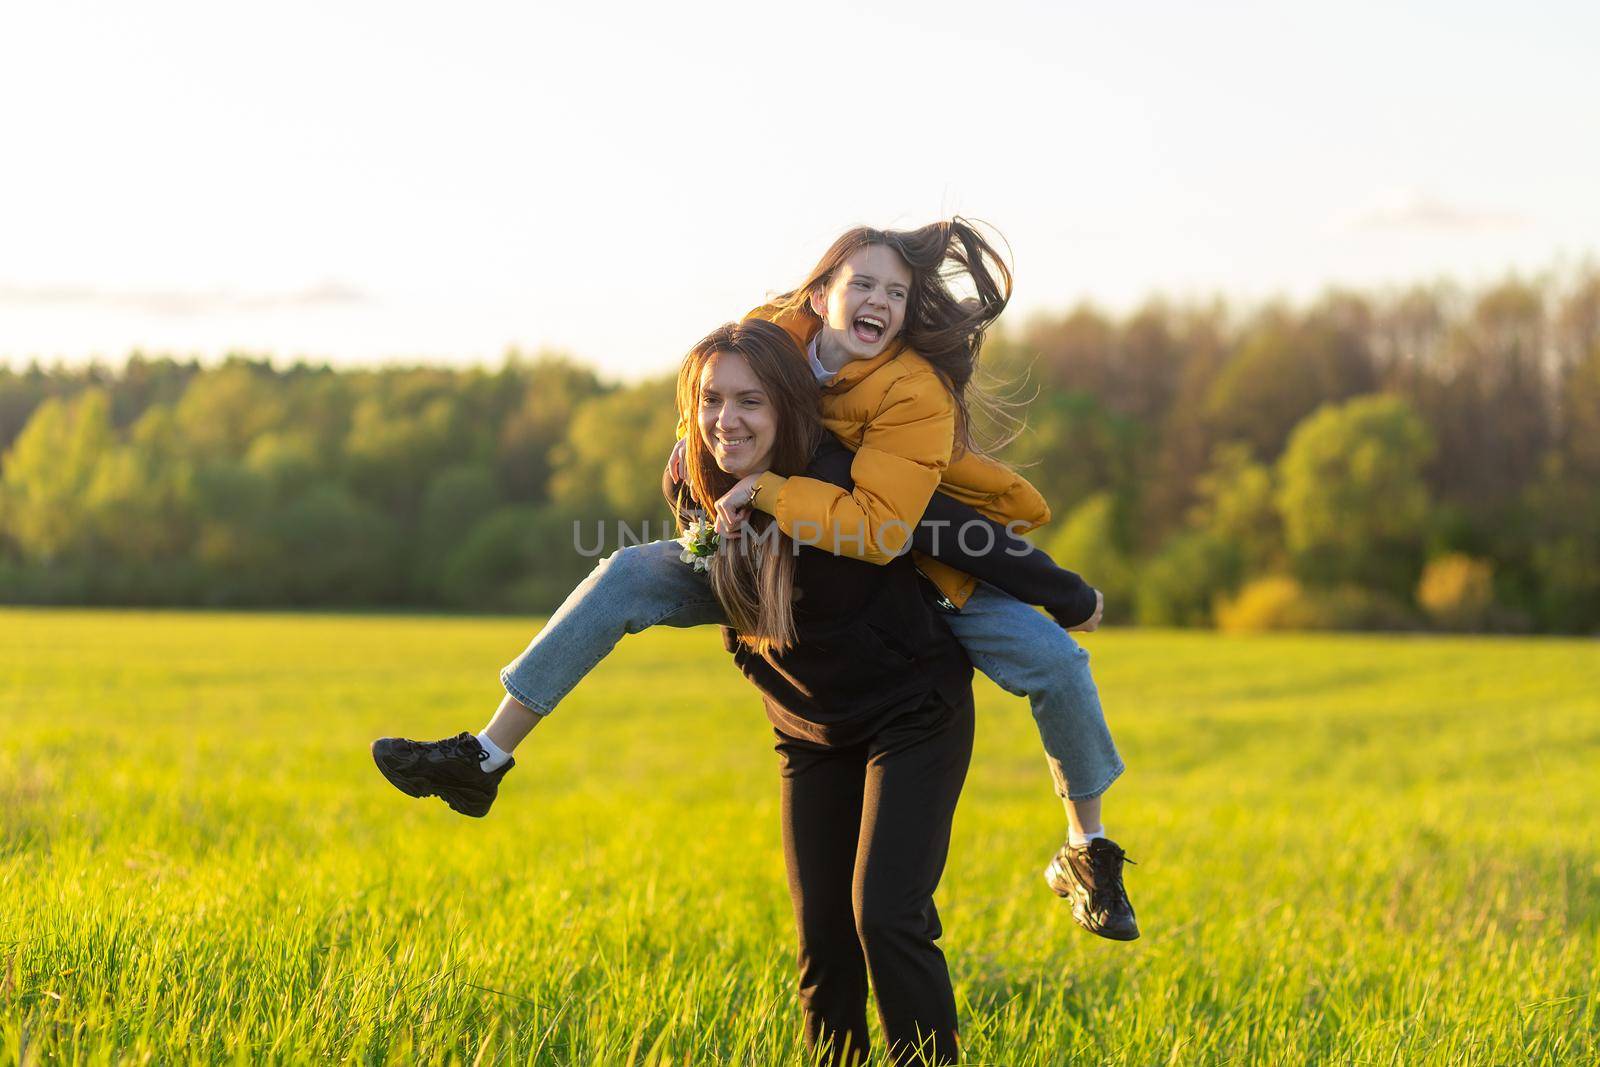 Playful mother giving daughter piggy back ride at green field. Both laughing and look happy. Spring in forest background. Closeup.